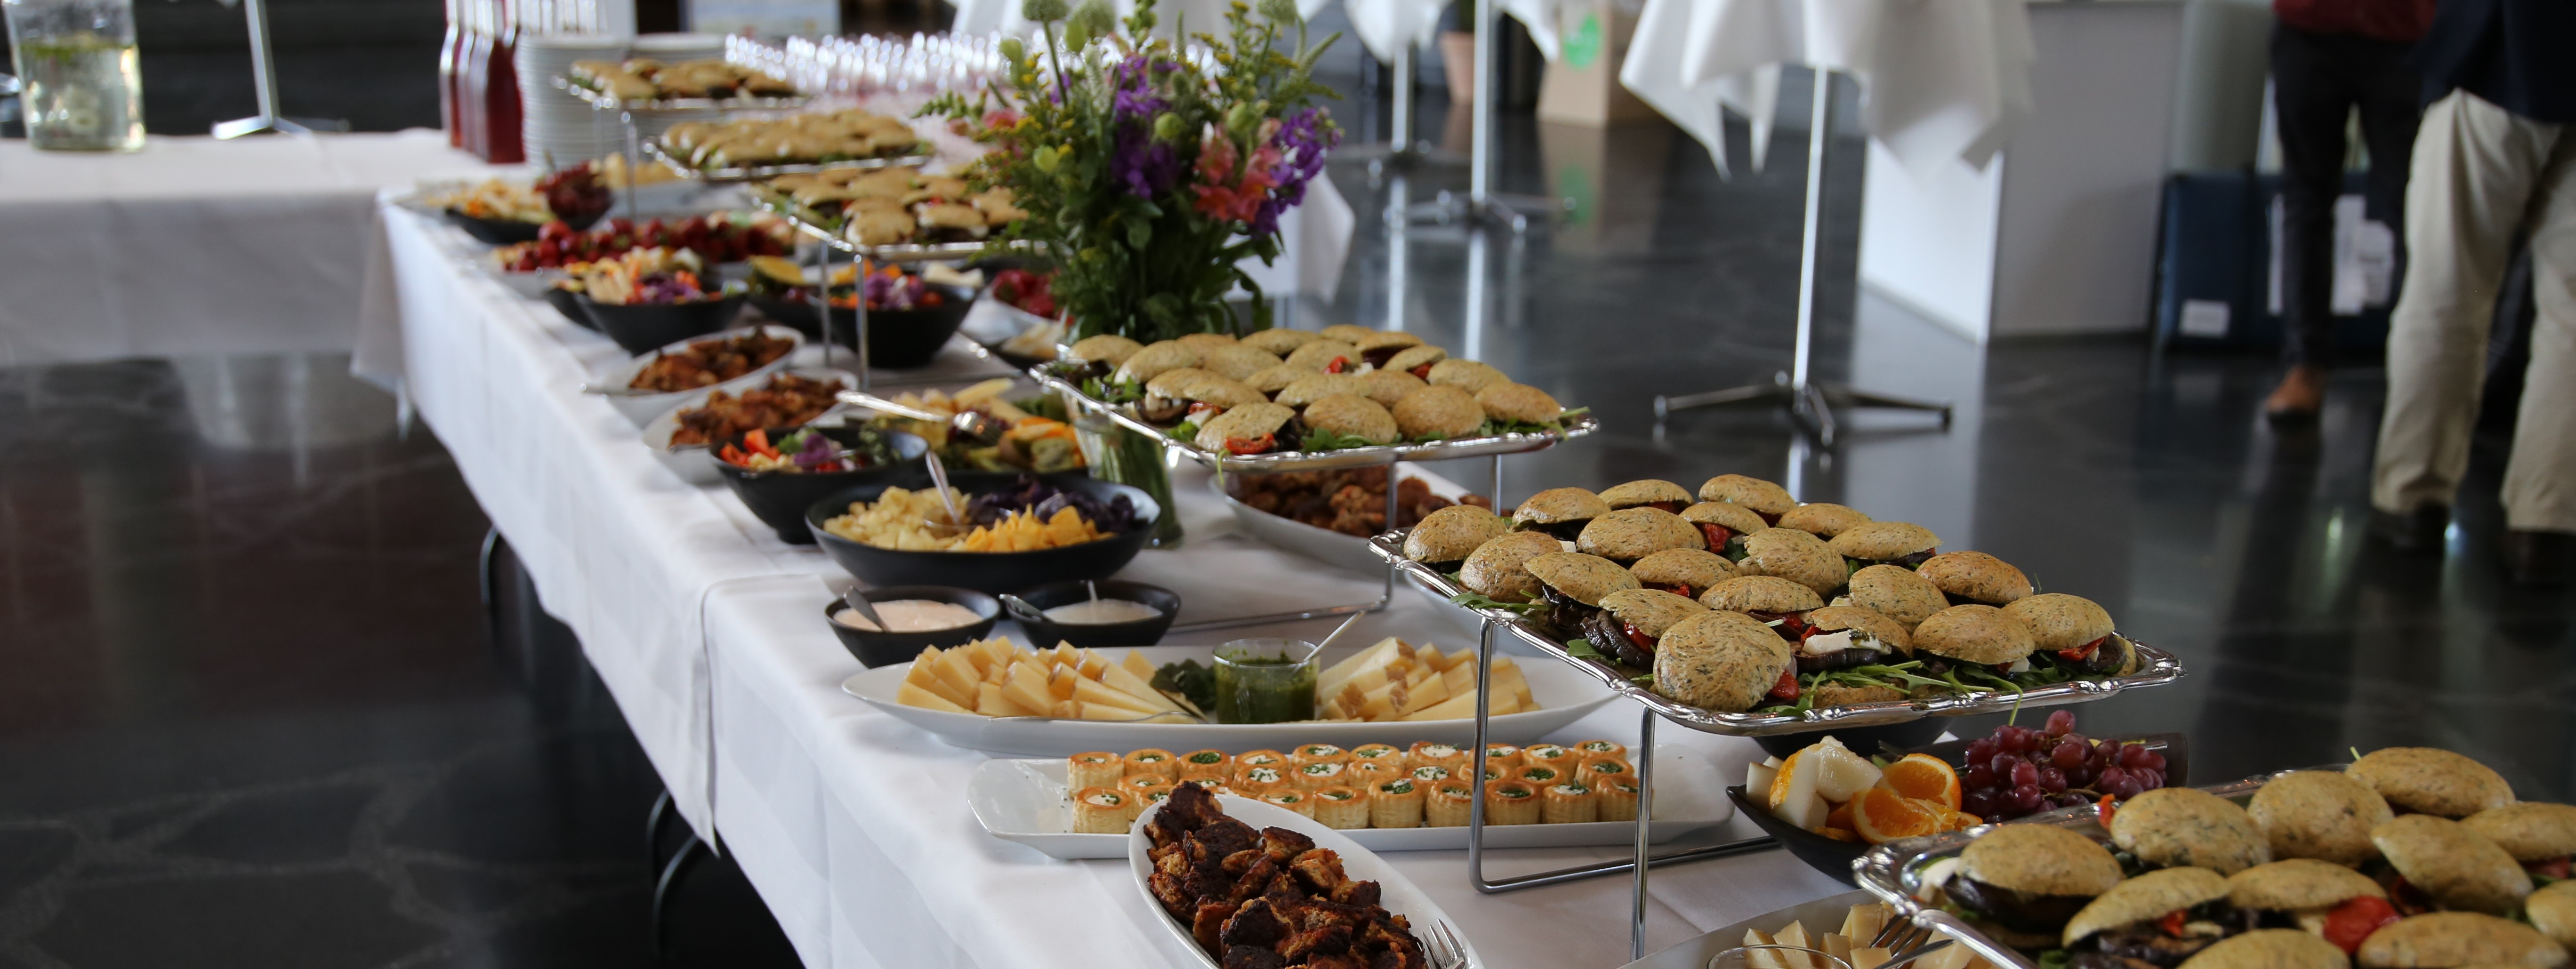 Vegetarian food at the conference